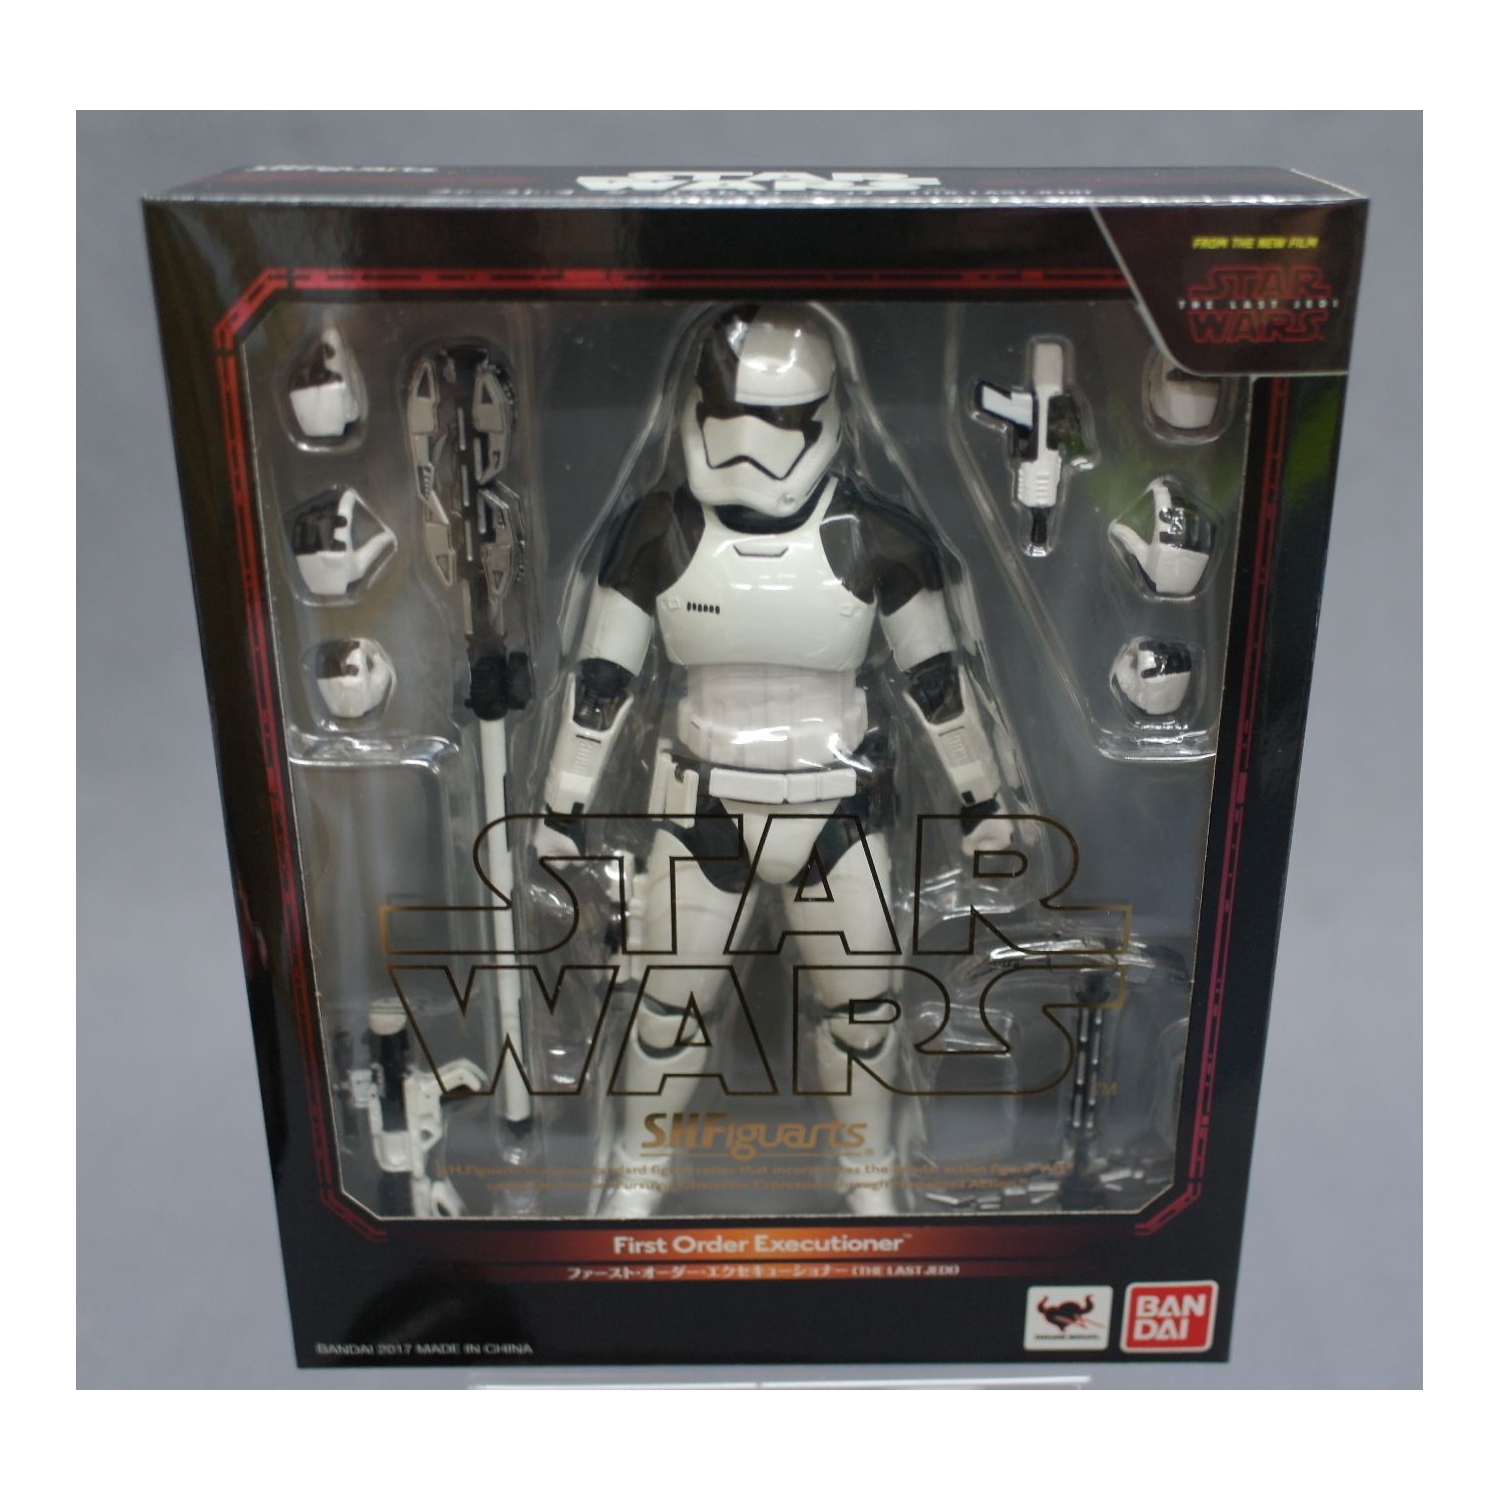 BANDAI S.H. Figuarts Star Wars The Last Jedi 6" Action Figure First Order Stormtrooper